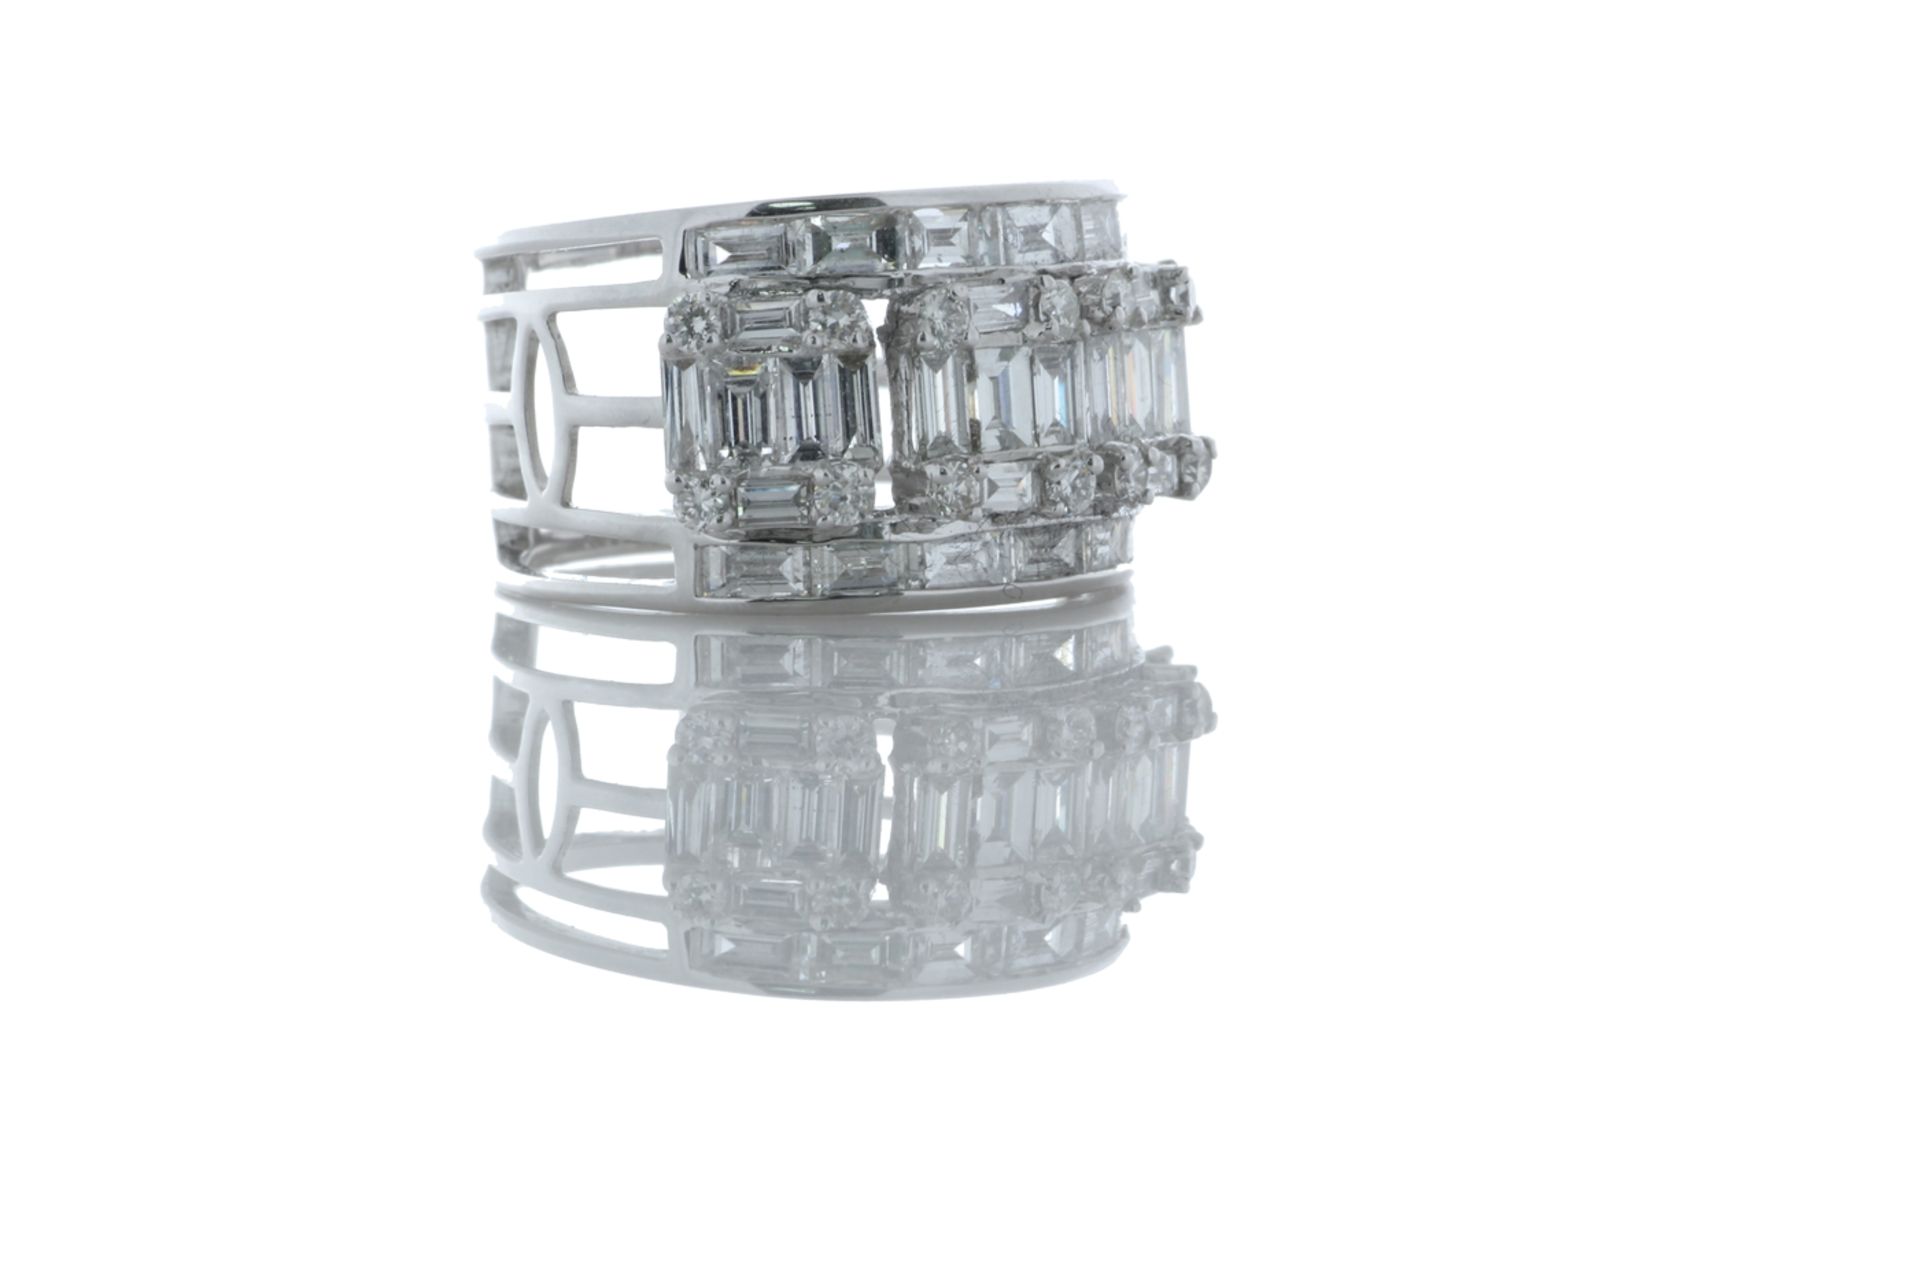 18ct White Gold Emerald Cut Eternity Diamond Ring 2.80 Carats - Valued by GIE £13,635.00 - 18ct - Image 4 of 5